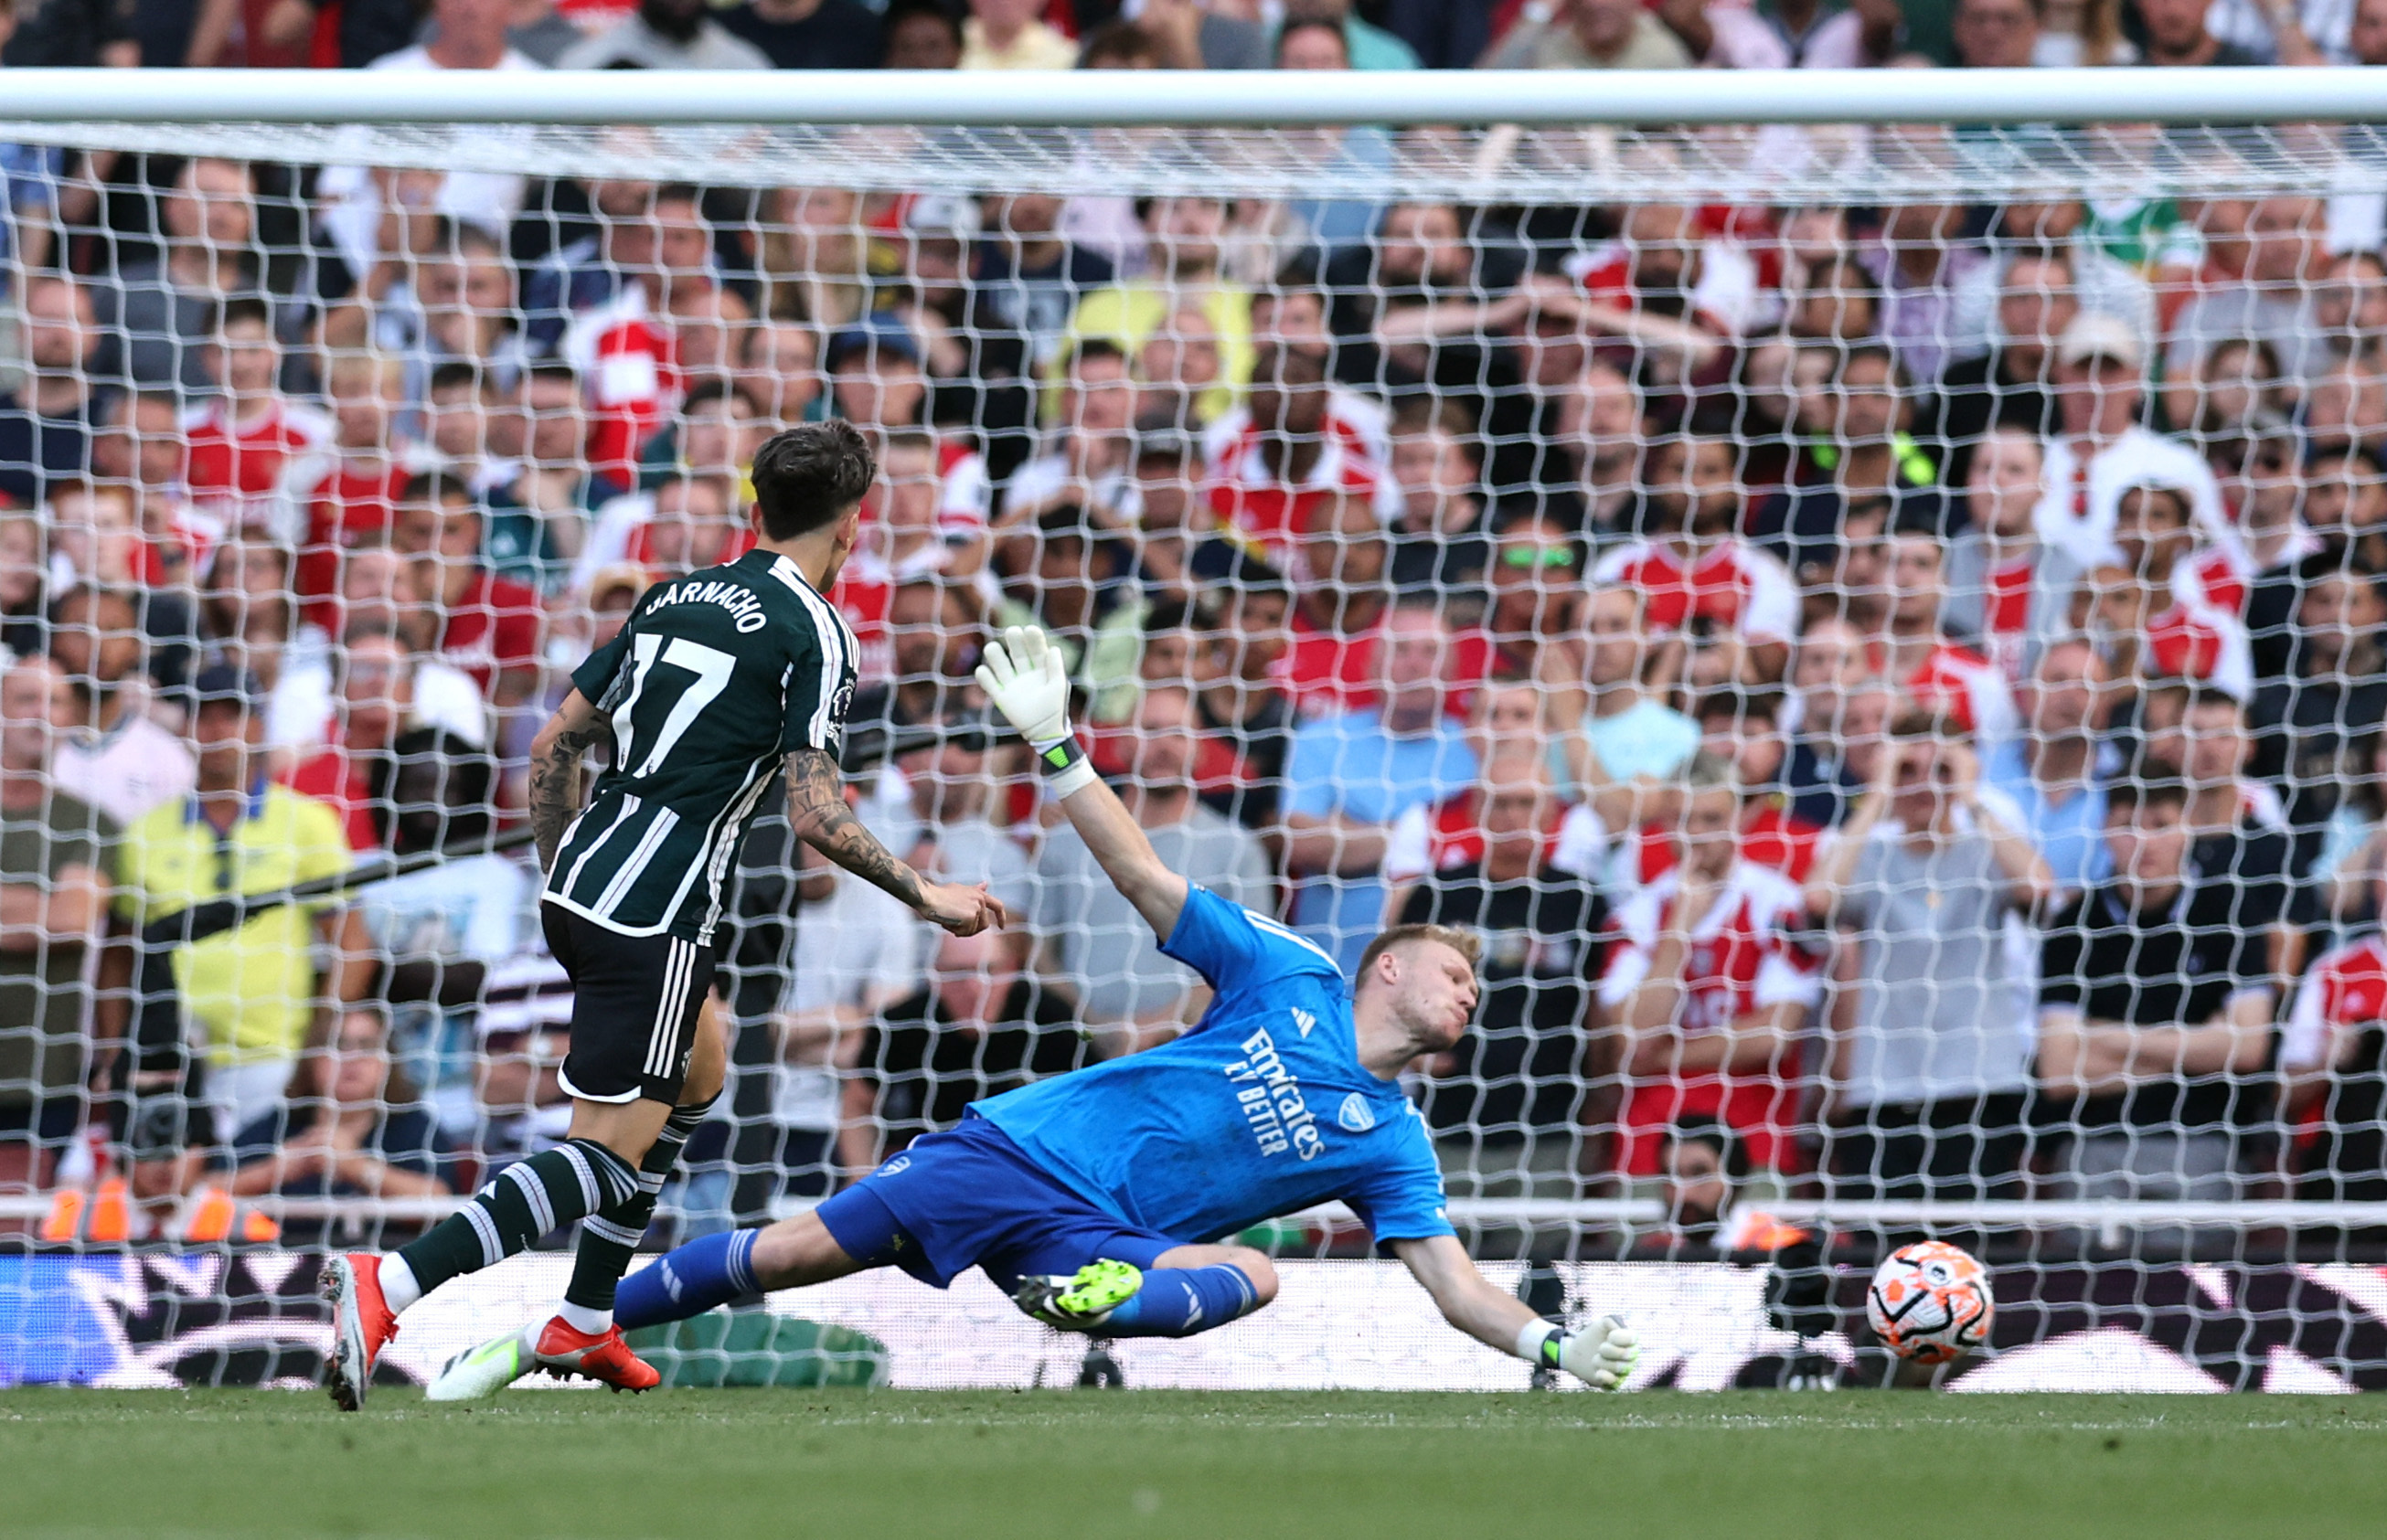 Rice and Jesus score in injury time as Arsenal earns 3-1 win over  Manchester United in EPL - The San Diego Union-Tribune